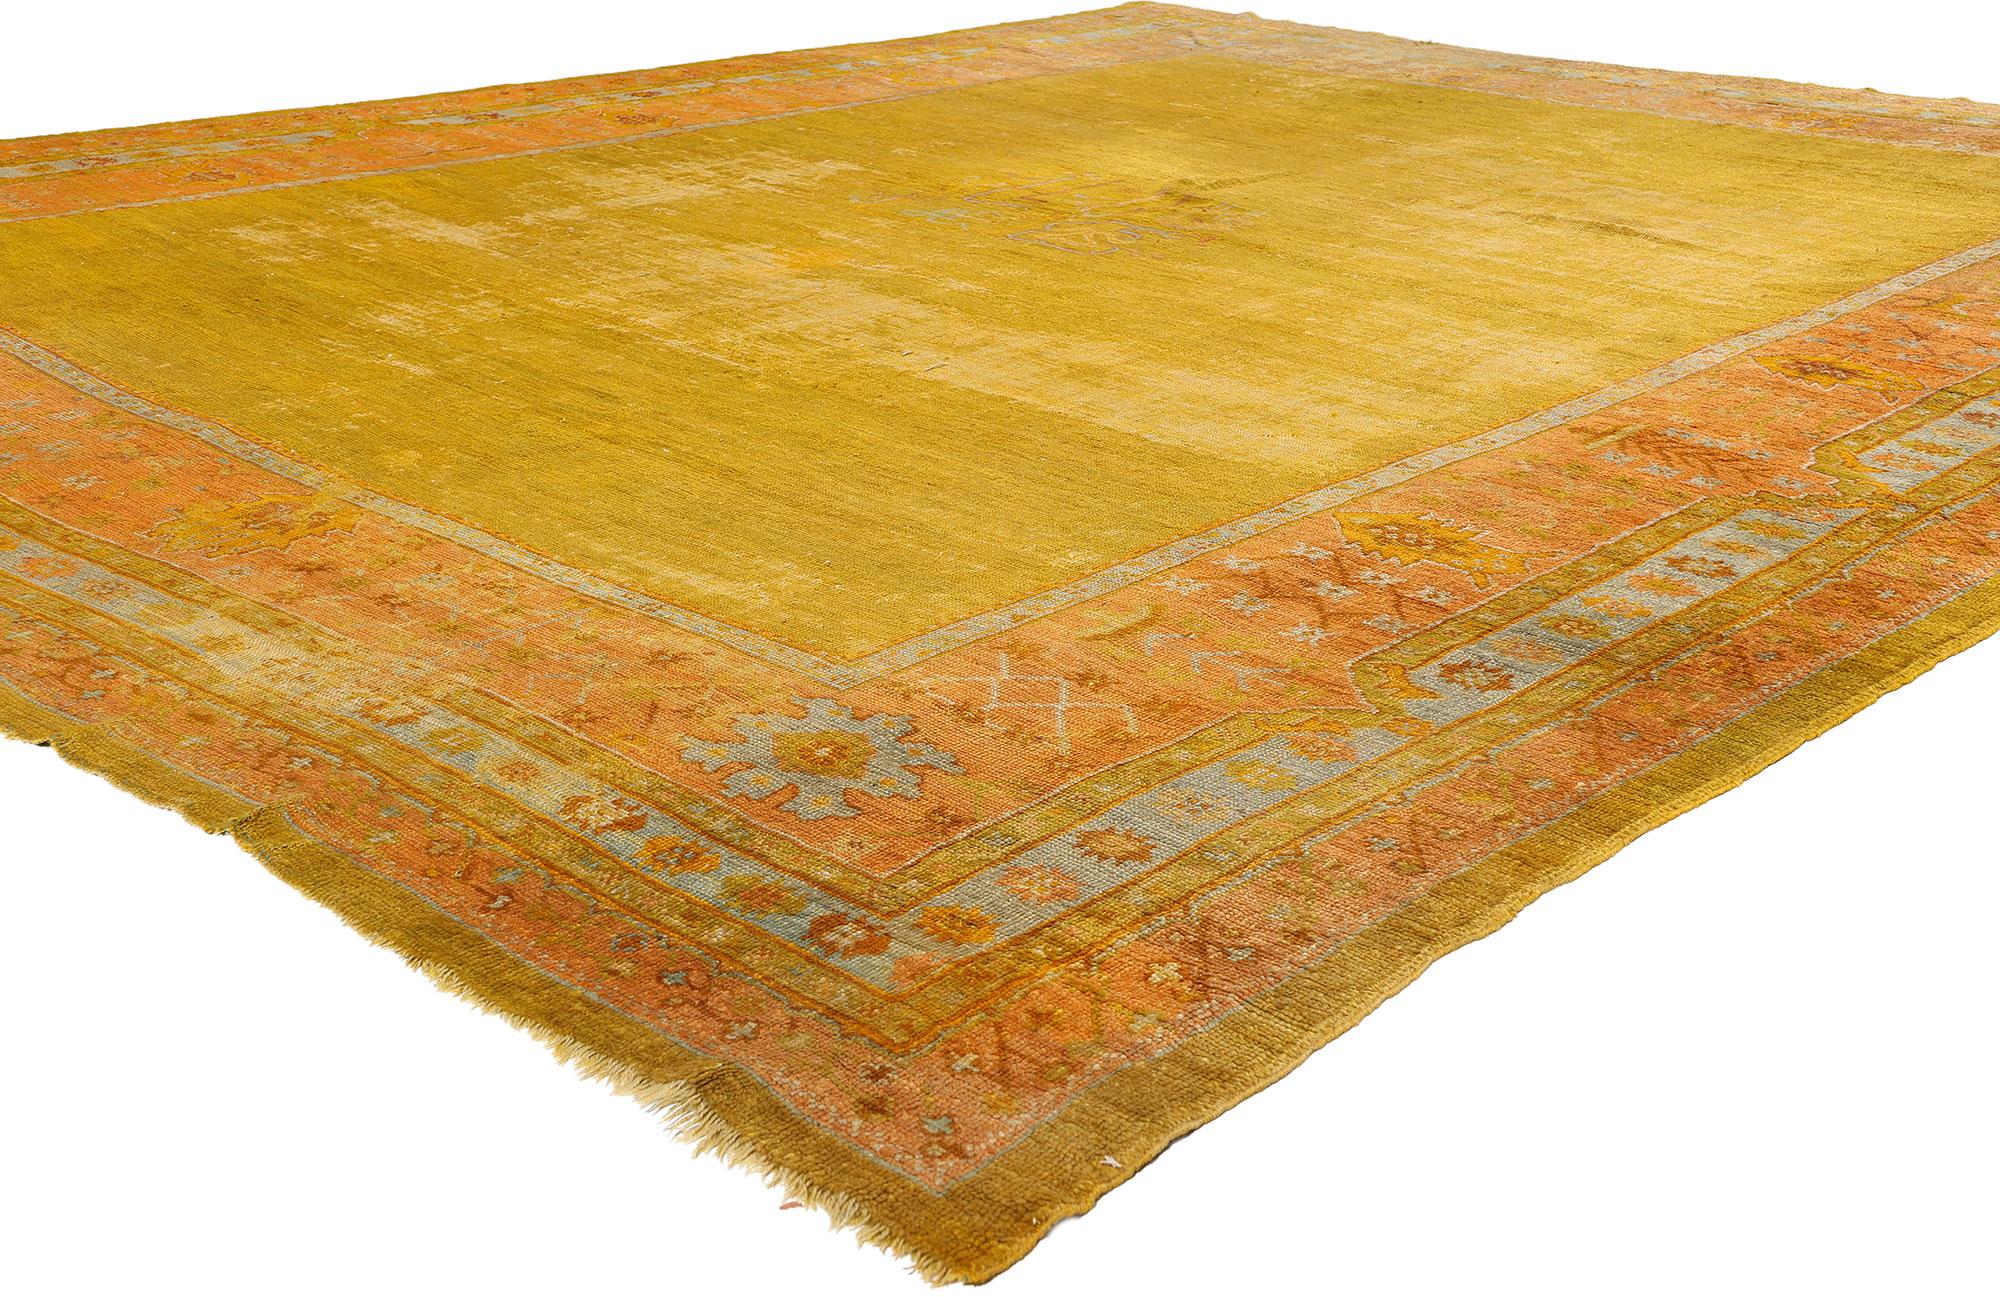 78742 Distressed Antique-Worn Turkish Gold Oushak Rug, 12'02 x 15'00. Originating from the Western region of Oushak in Turkey, Turkish Oushak rugs have earned widespread admiration for their intricate designs, soft color palettes, and premium wool